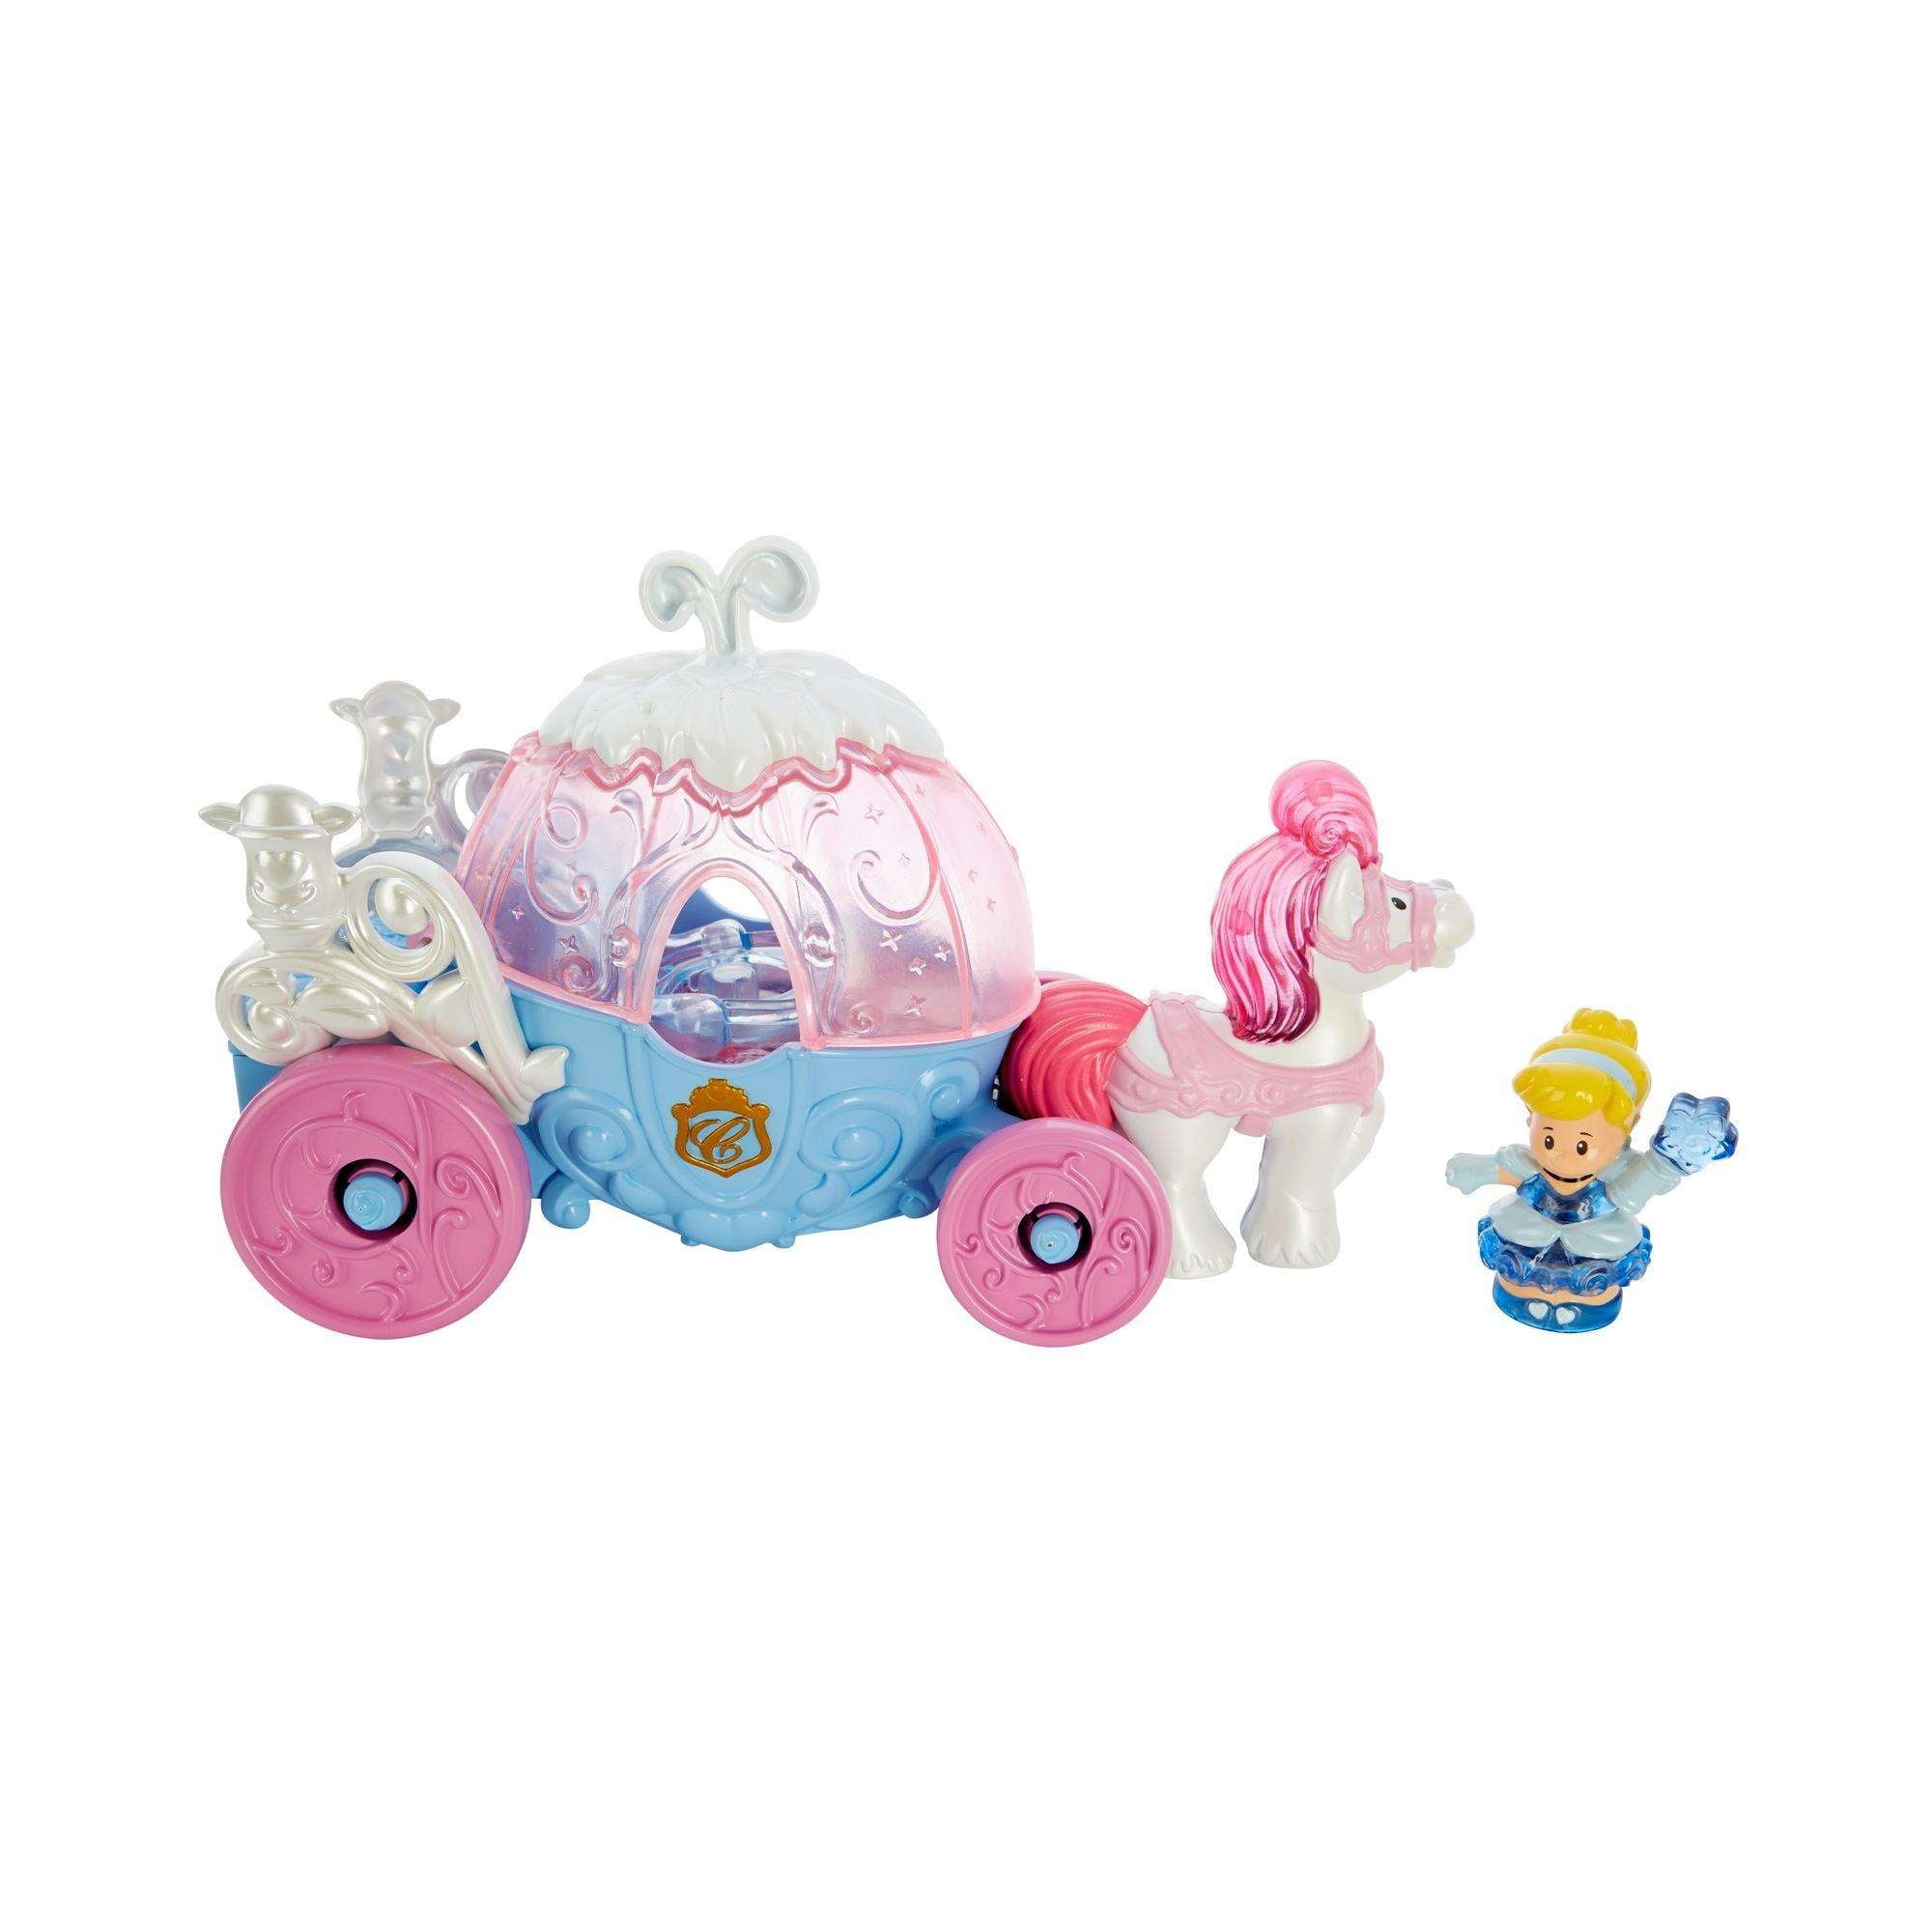 little people horse carriage